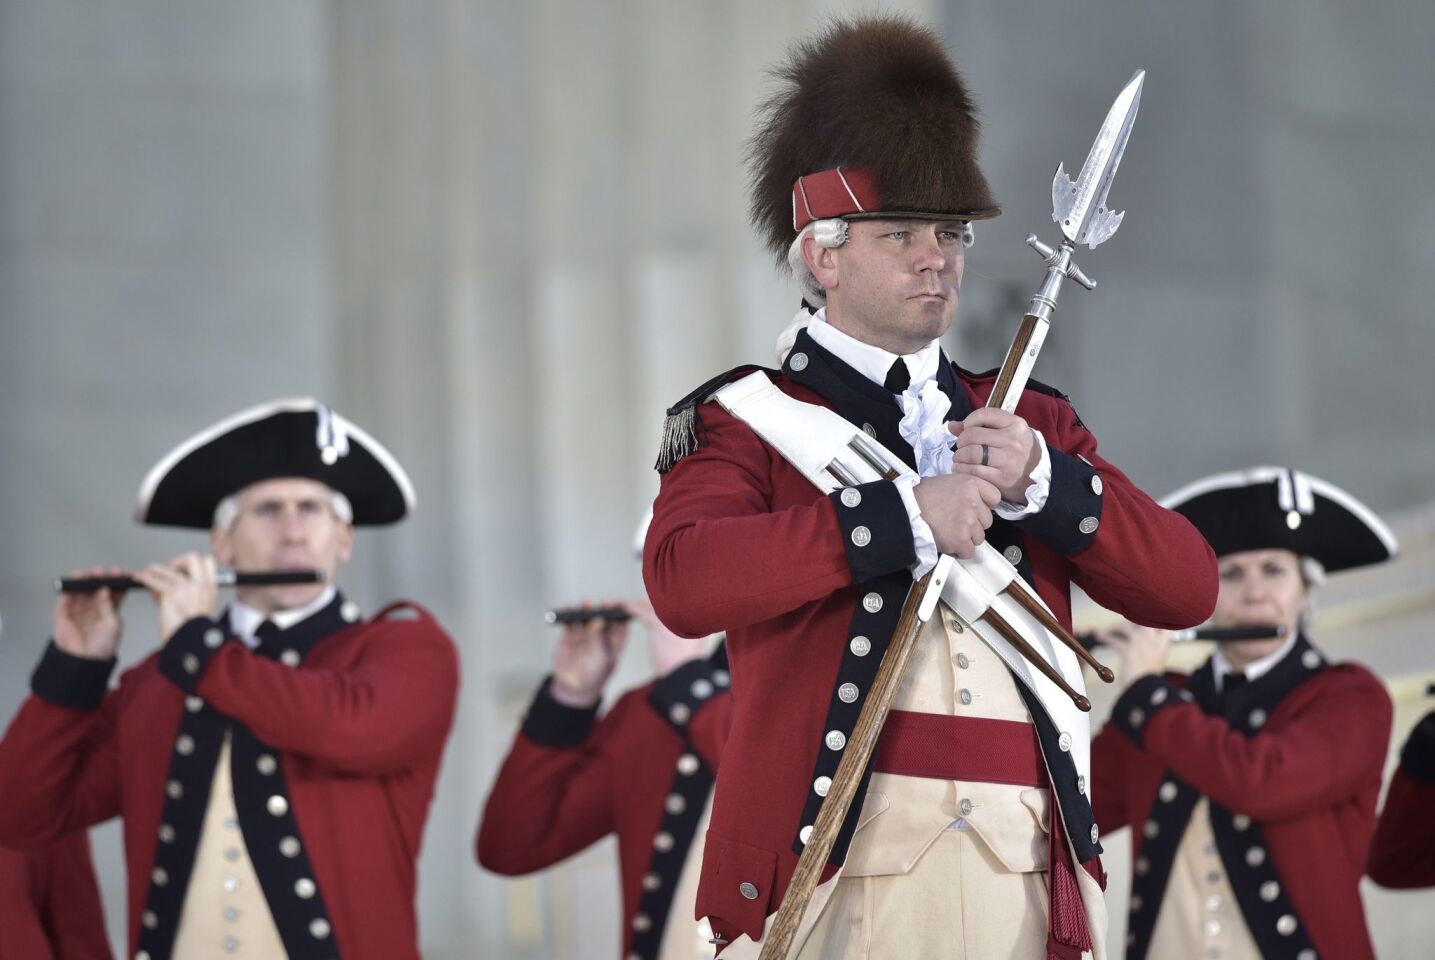 A military band performs at the Lincoln Memorial in Washington, D.C., on Thursday.